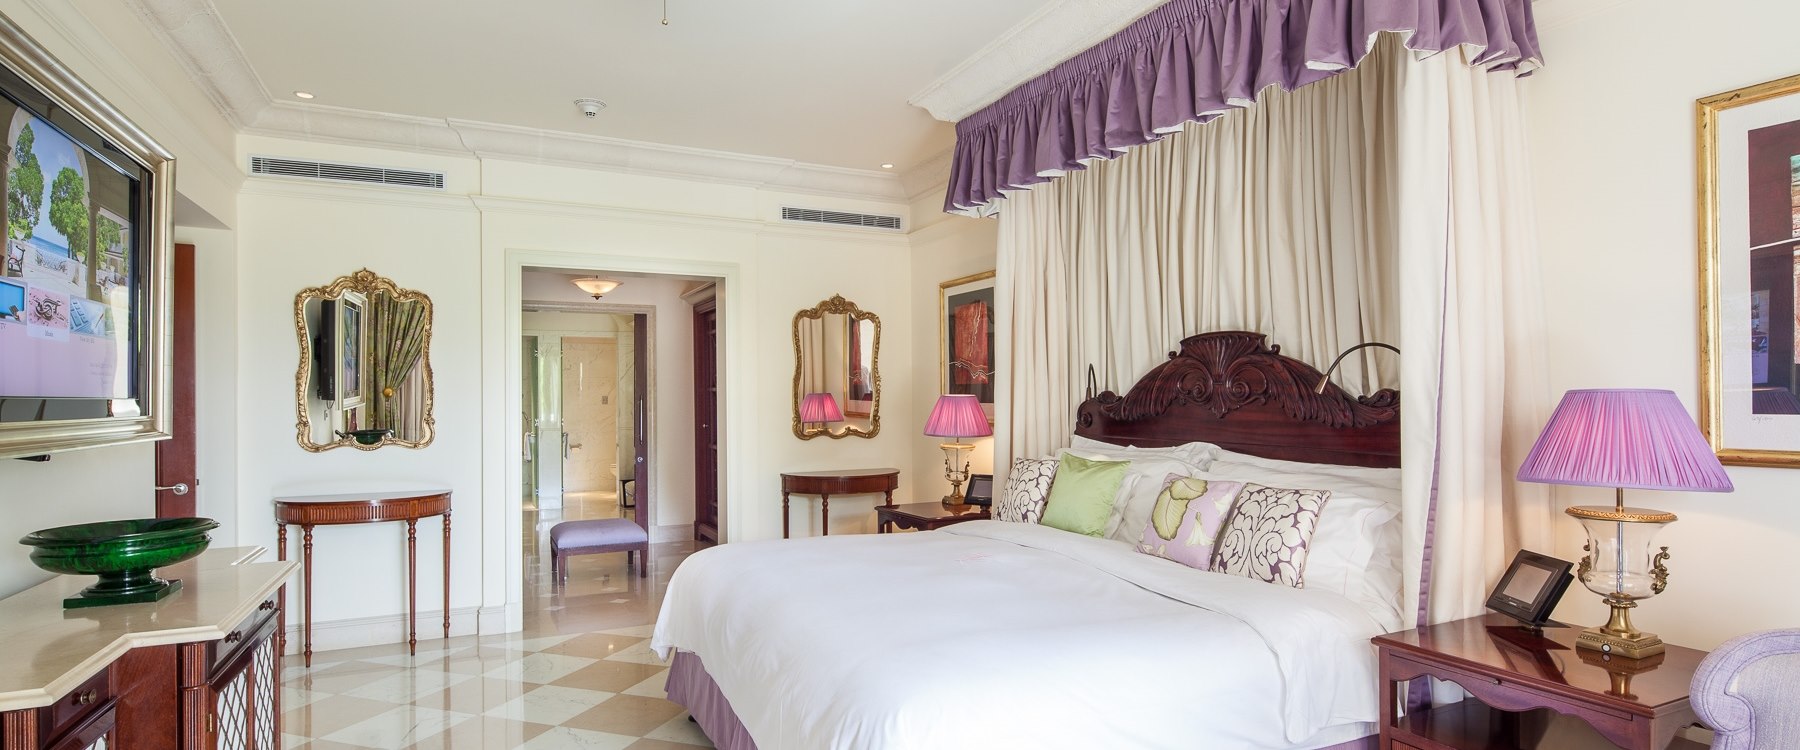 Main bedroom within the penthouse at Sandy Lane, Barbados